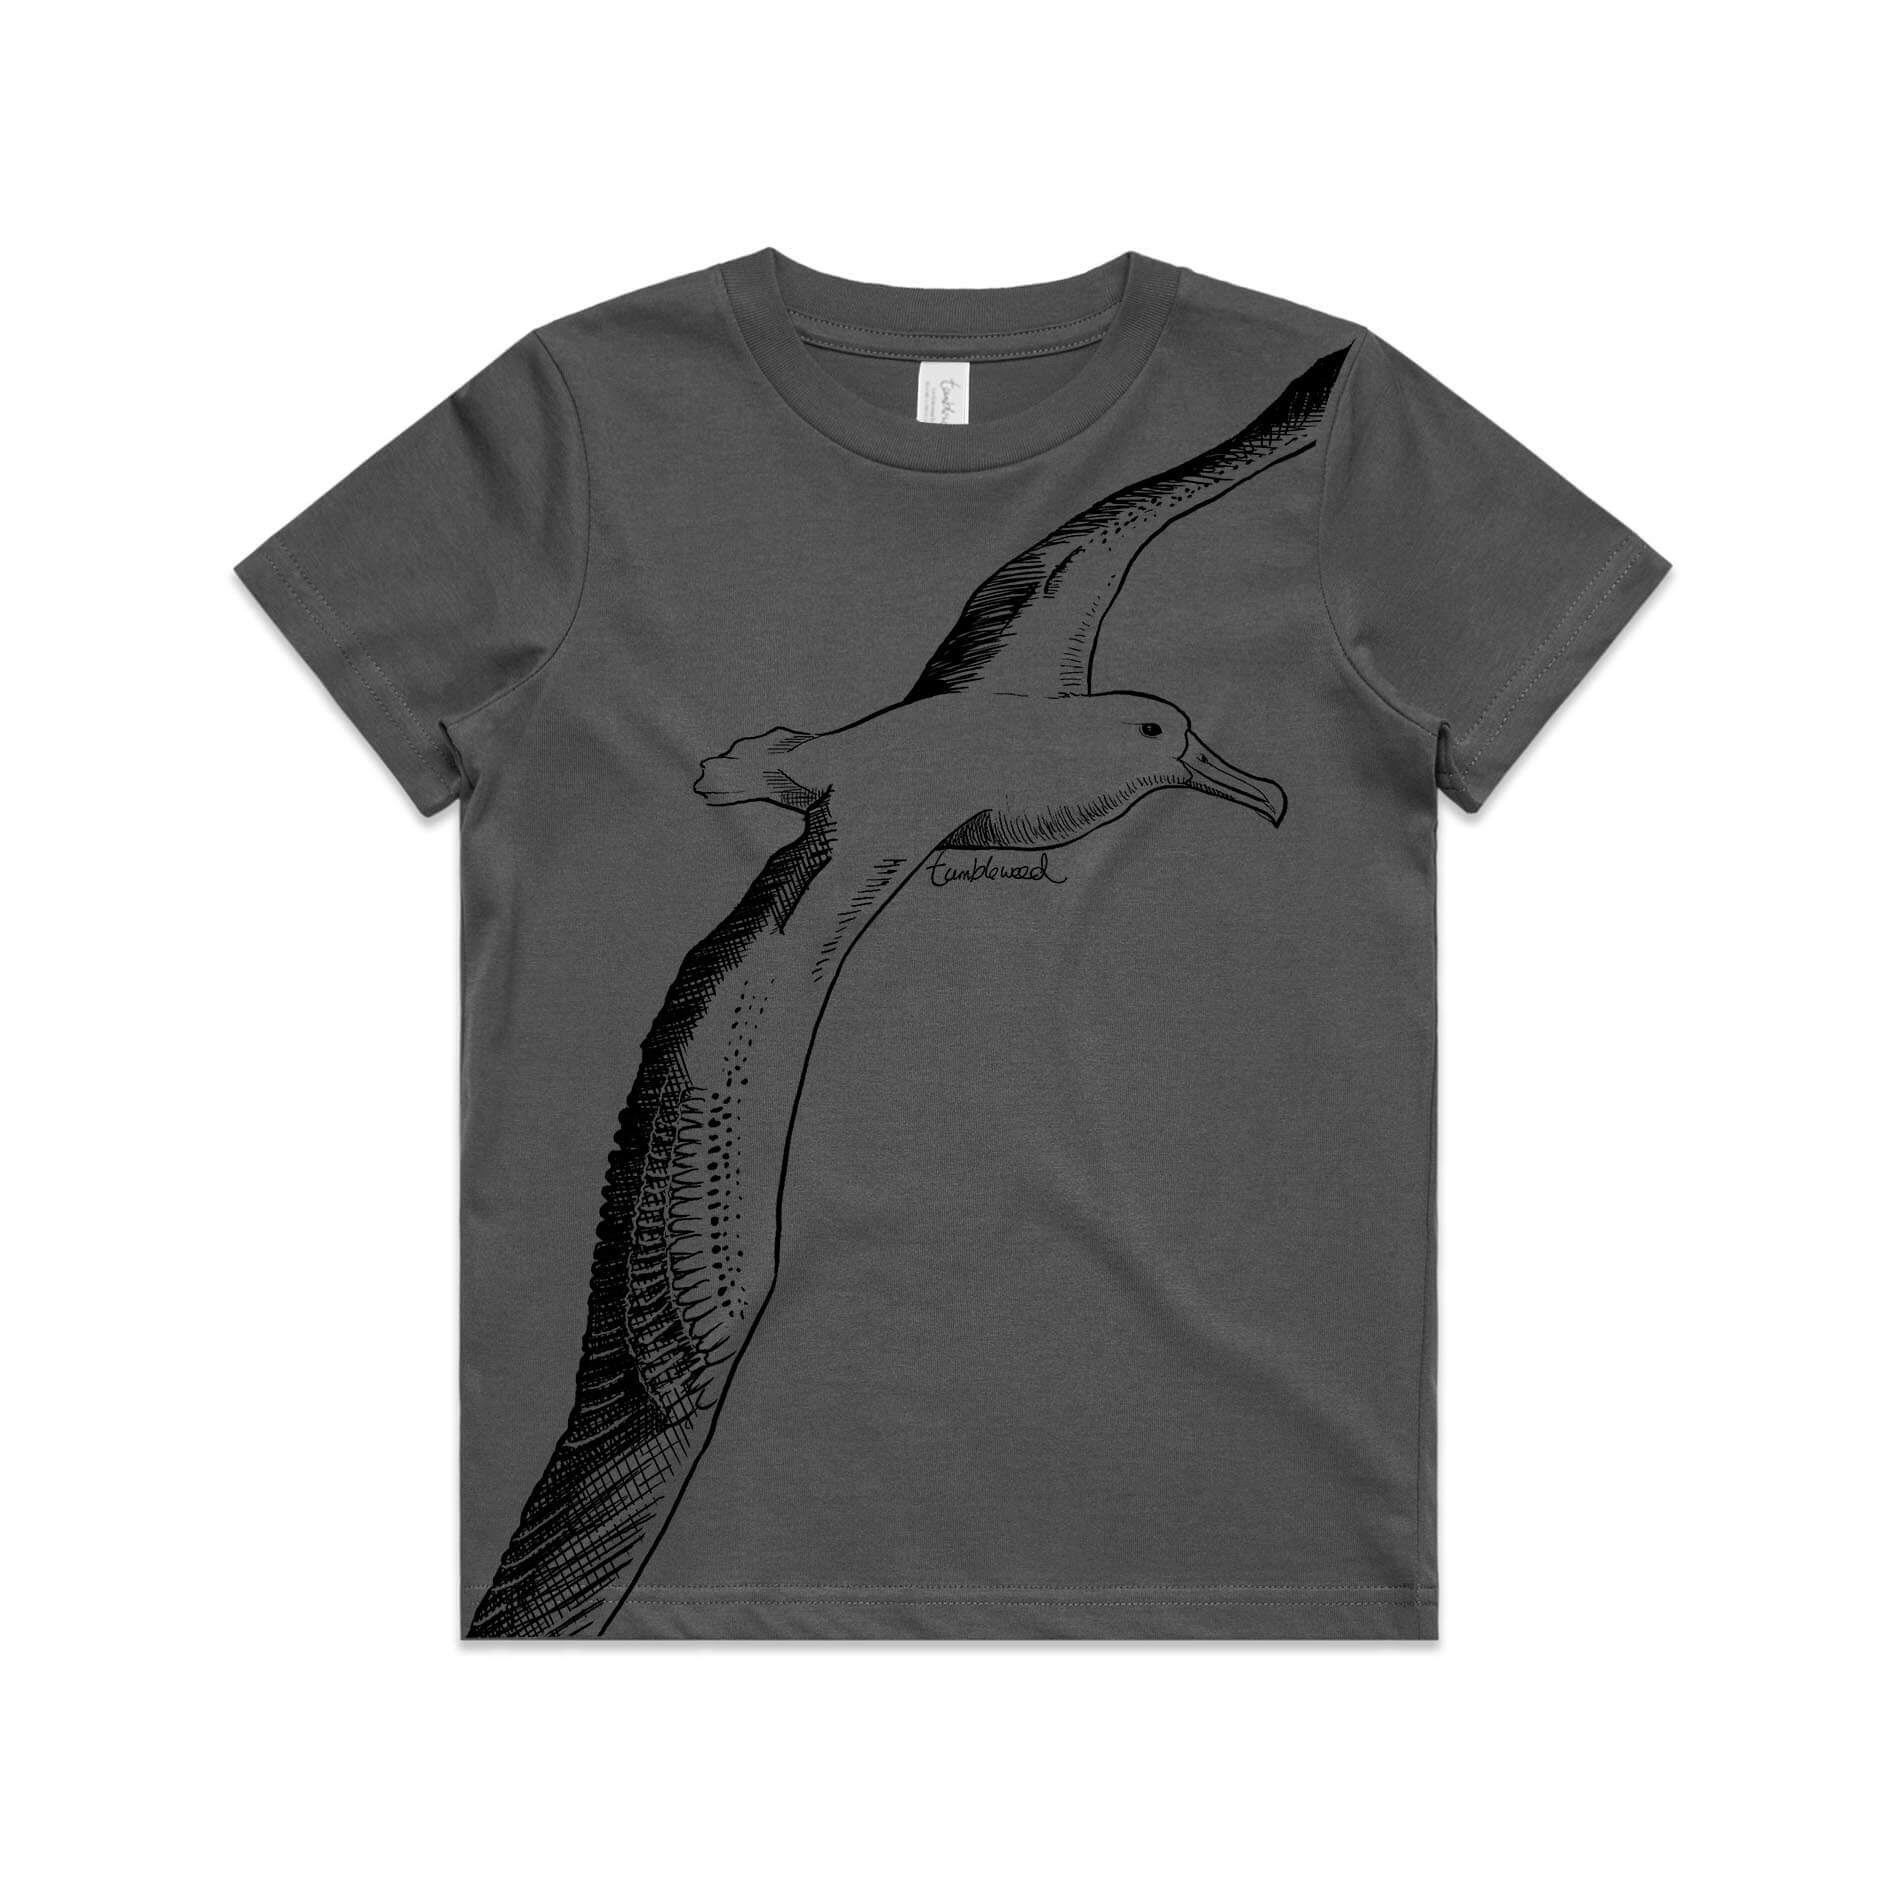 Charcoal, cotton kids' t-shirt with screen printed albatross design.